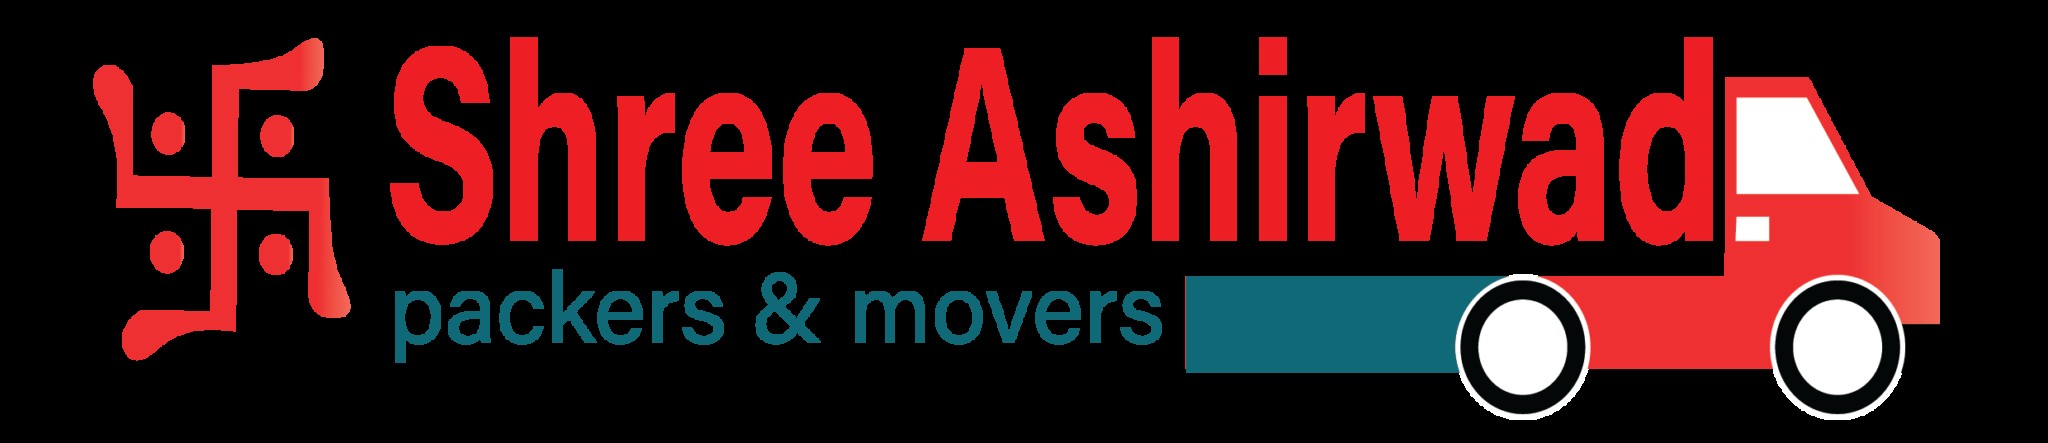 Shree Ashirwad Packers Movers Profile Picture